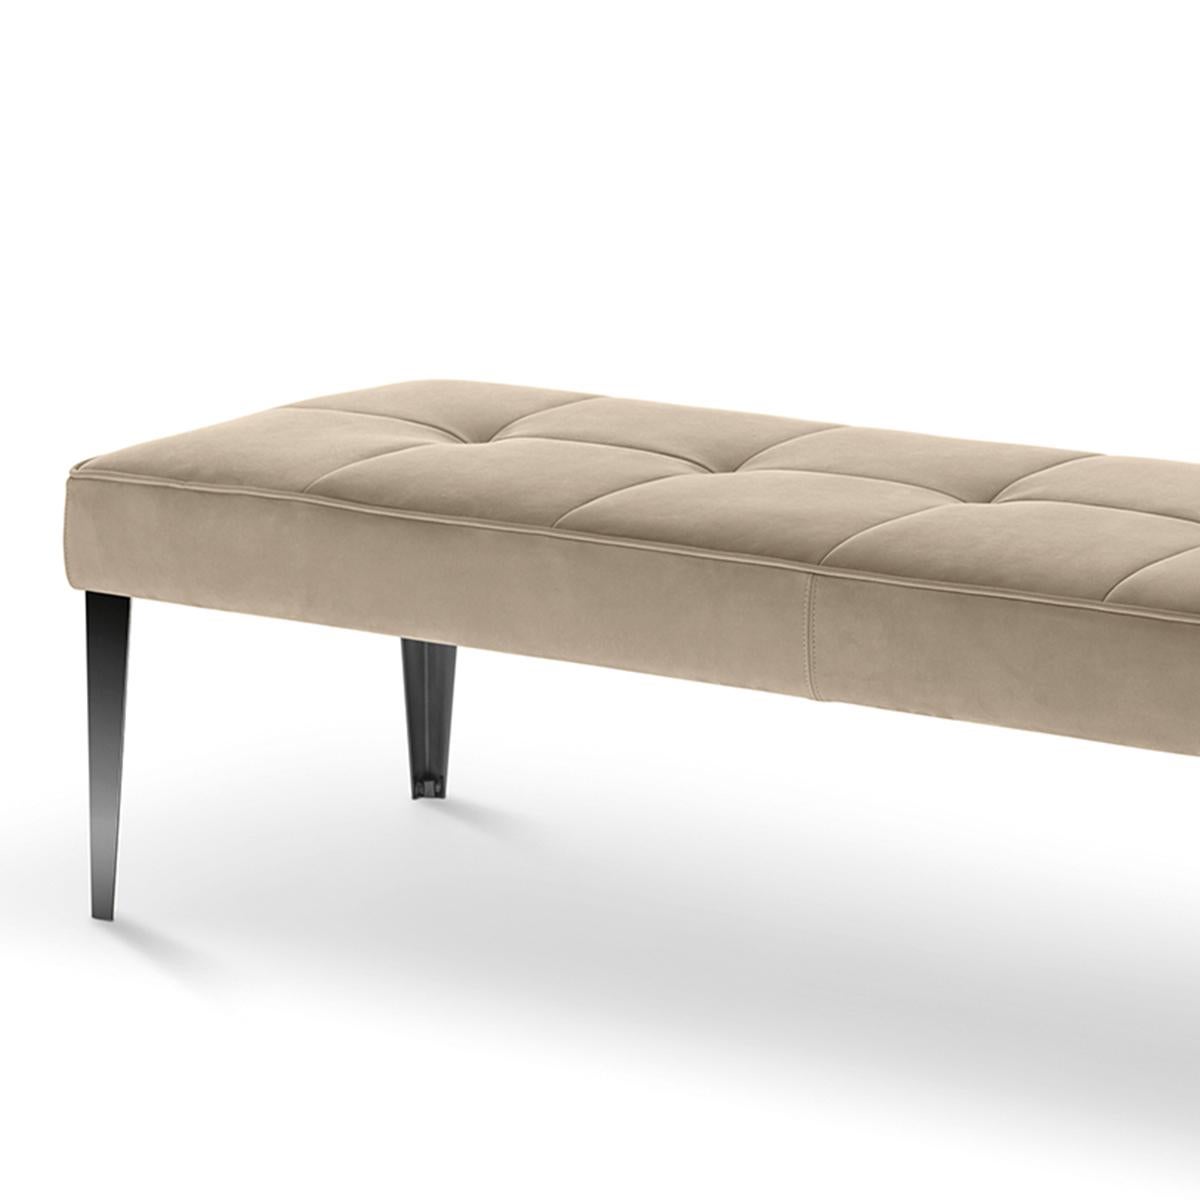 Bench Atika with solid wood structure, upholstered
and covered with suede leather in beige finish. With
brass feet in black nickel finish.
Also available with other leather color or fabrics on request.